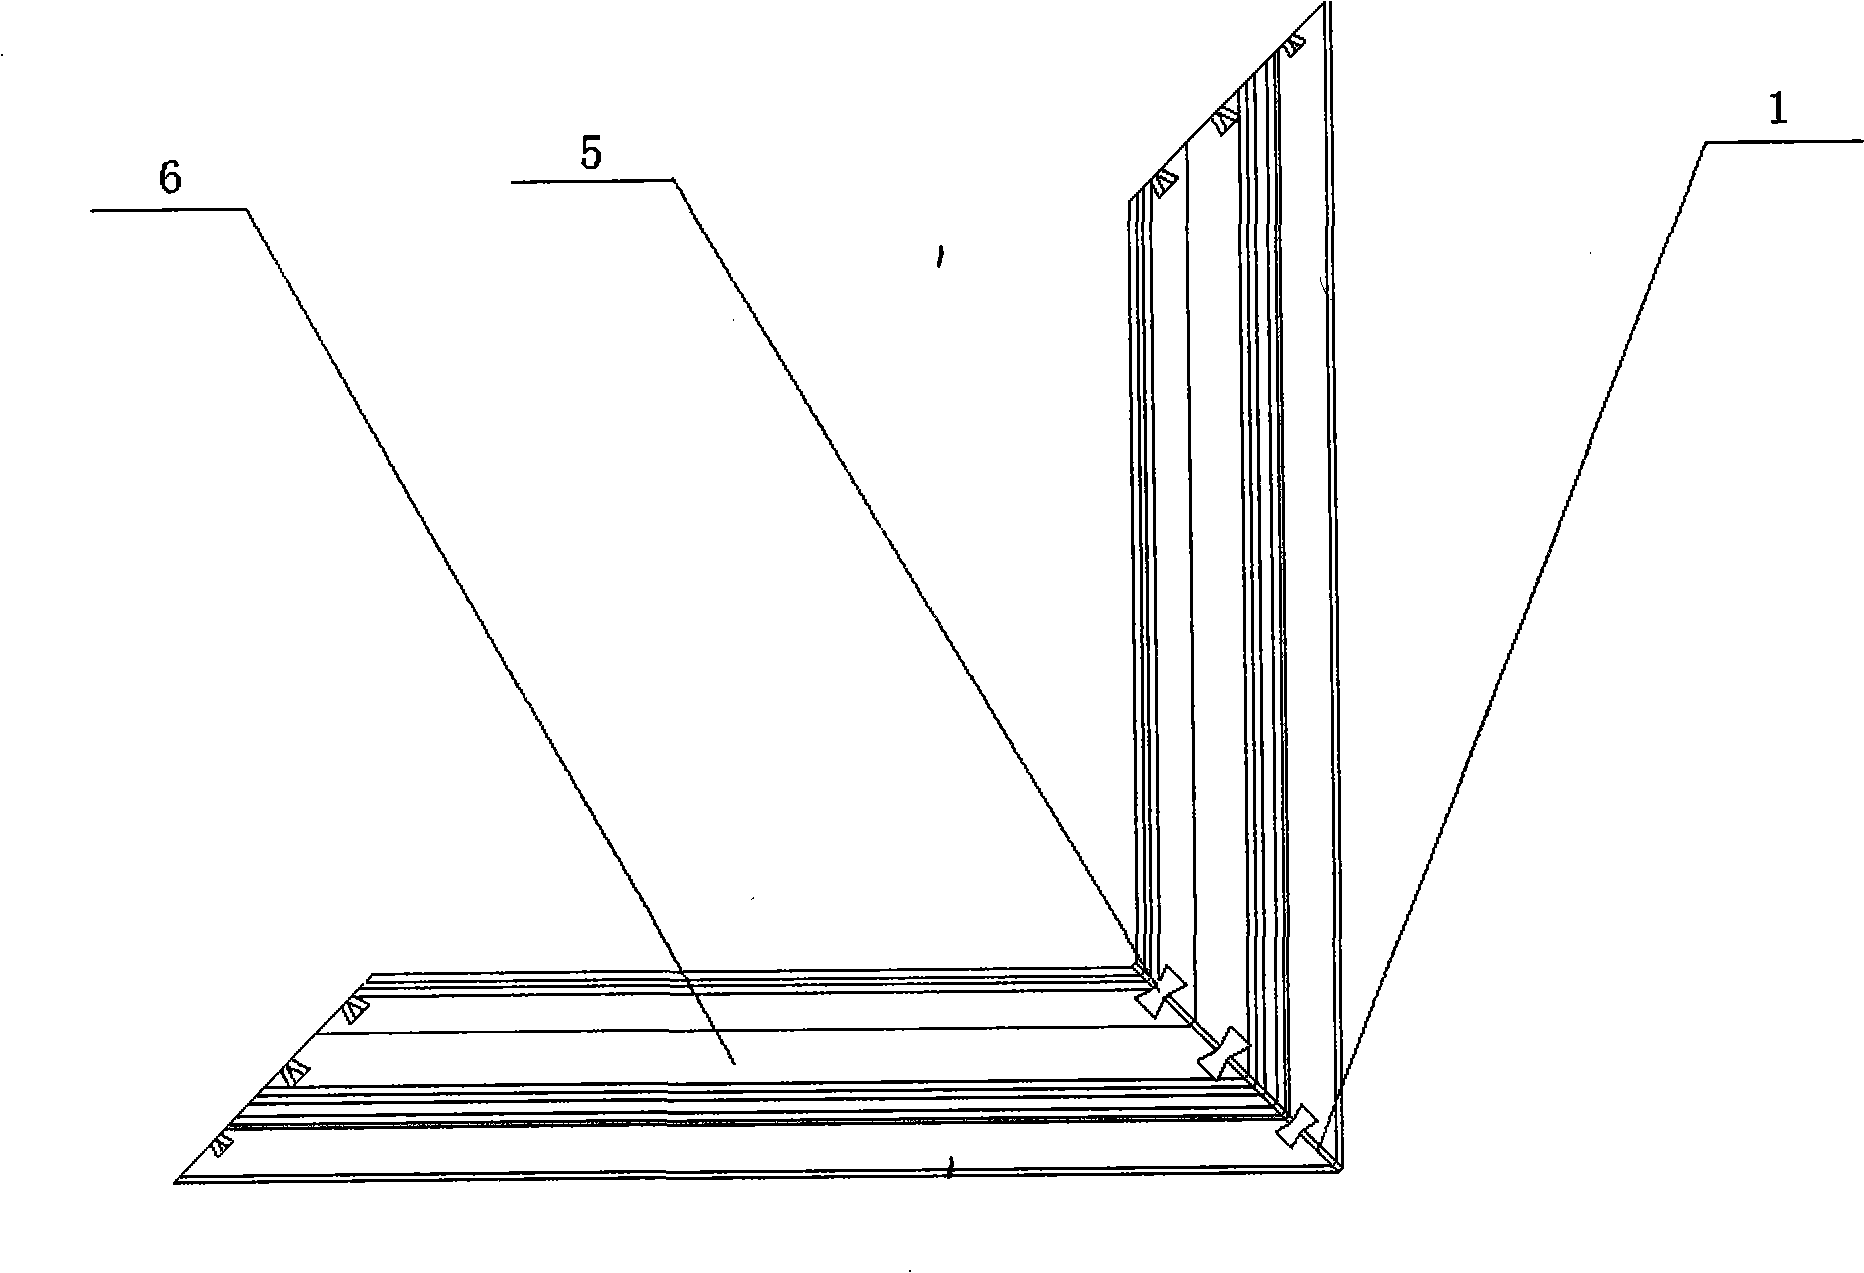 45 degree tenon joint board for wood door and window perpendicular connection angle